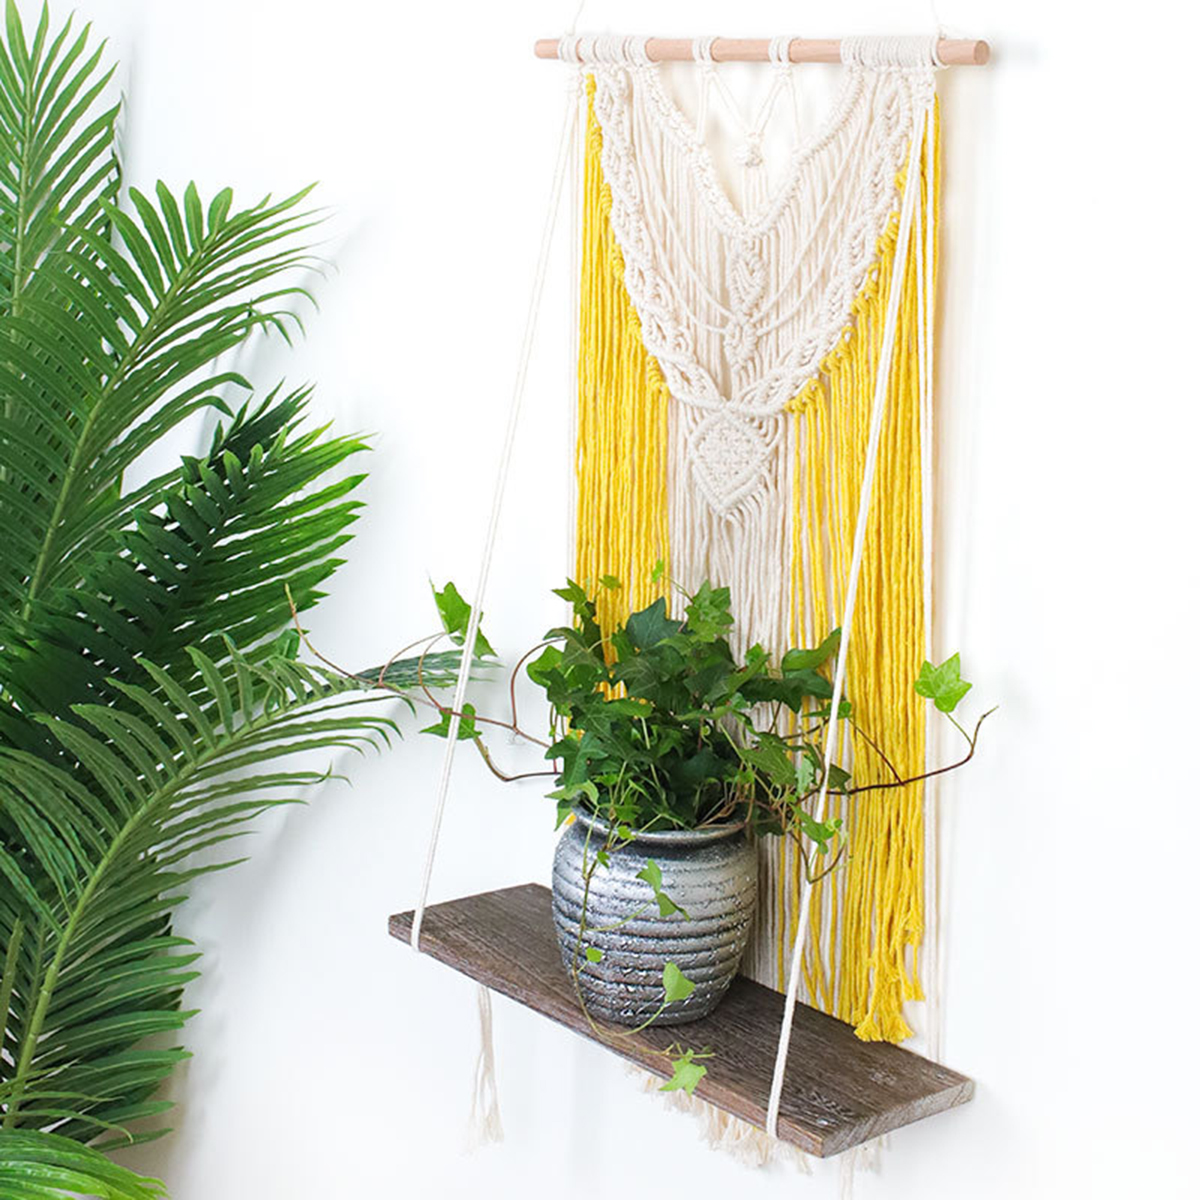 Wall-mounted-Lace-Woven-Macrame-Plant-Hanger-Wall-Cotton-Rope-Tapestry-Shelf-1727270-6